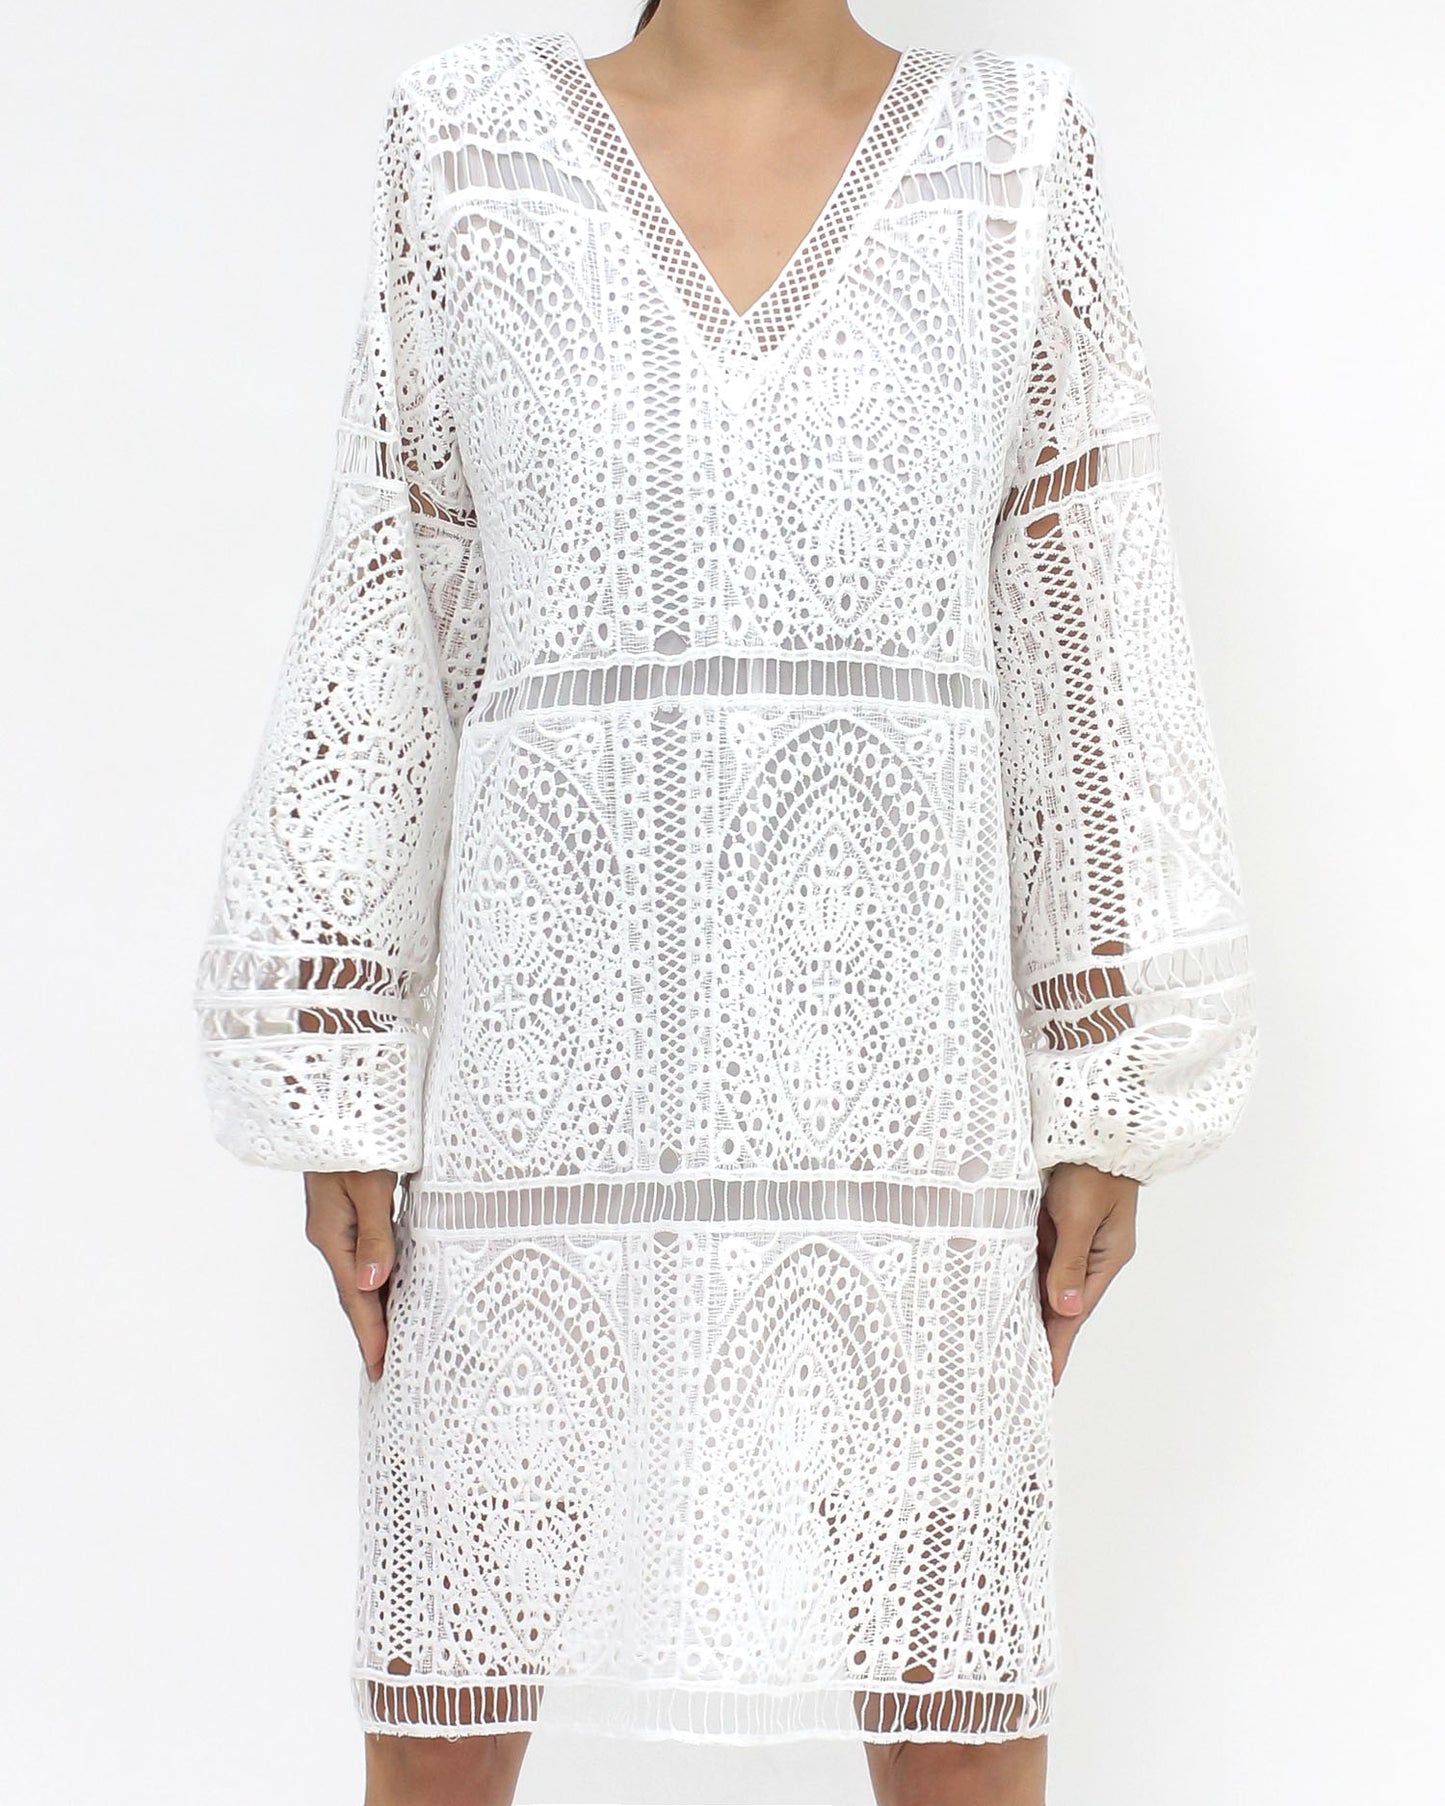 ivory crochet tie-up back cover up dress *pre-order*